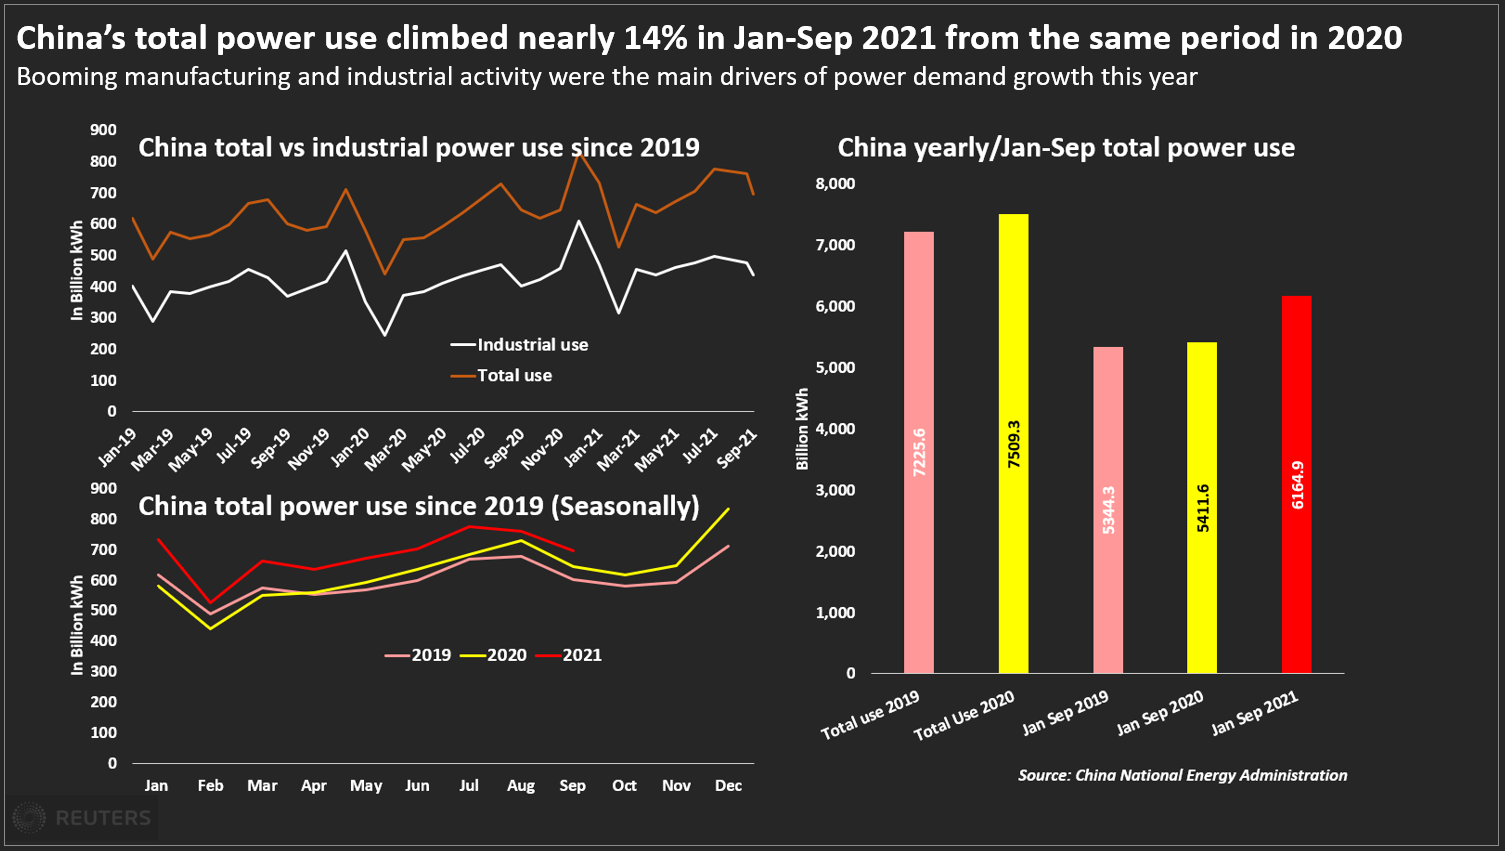 China’s total power use climbed nearly 14% in Jan-Sep 2021 from the same period in 2020